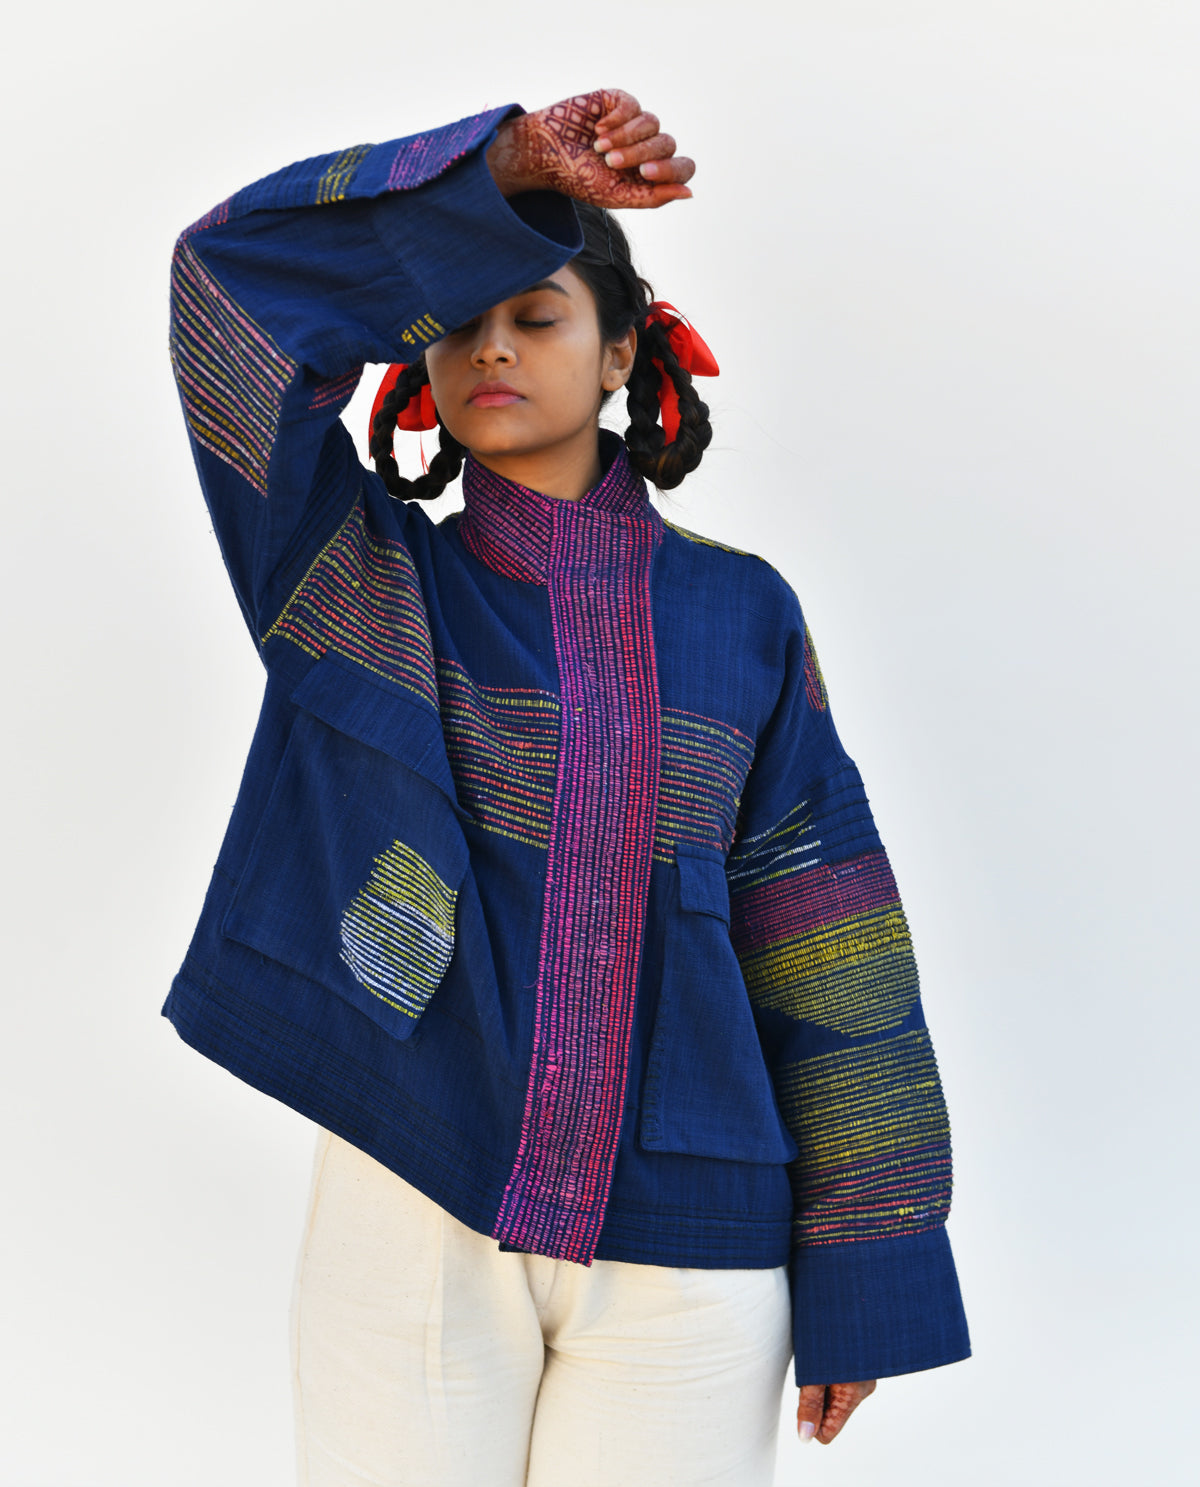 Upcycled Jacket matches the silhouette of a kimono and is handwoven in an extra weft technique.